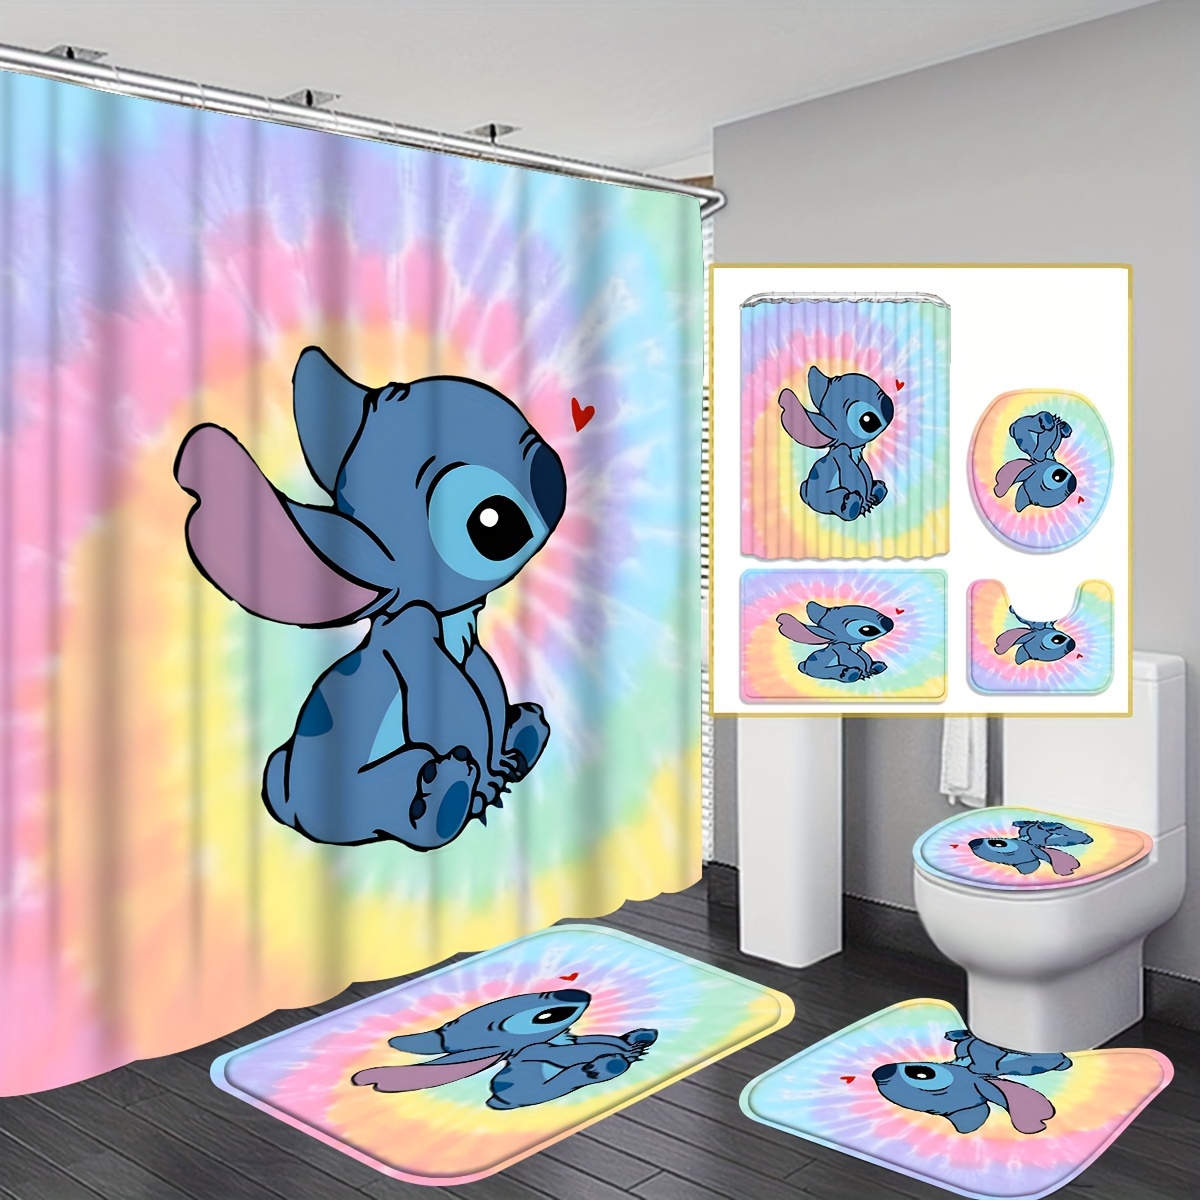 

Disney Stitch 4-piece Shower Curtain Set - Waterproof, Includes Non-slip Bath Mat & U-shaped Toilet Rug With Hooks - Perfect For Bathroom Decor